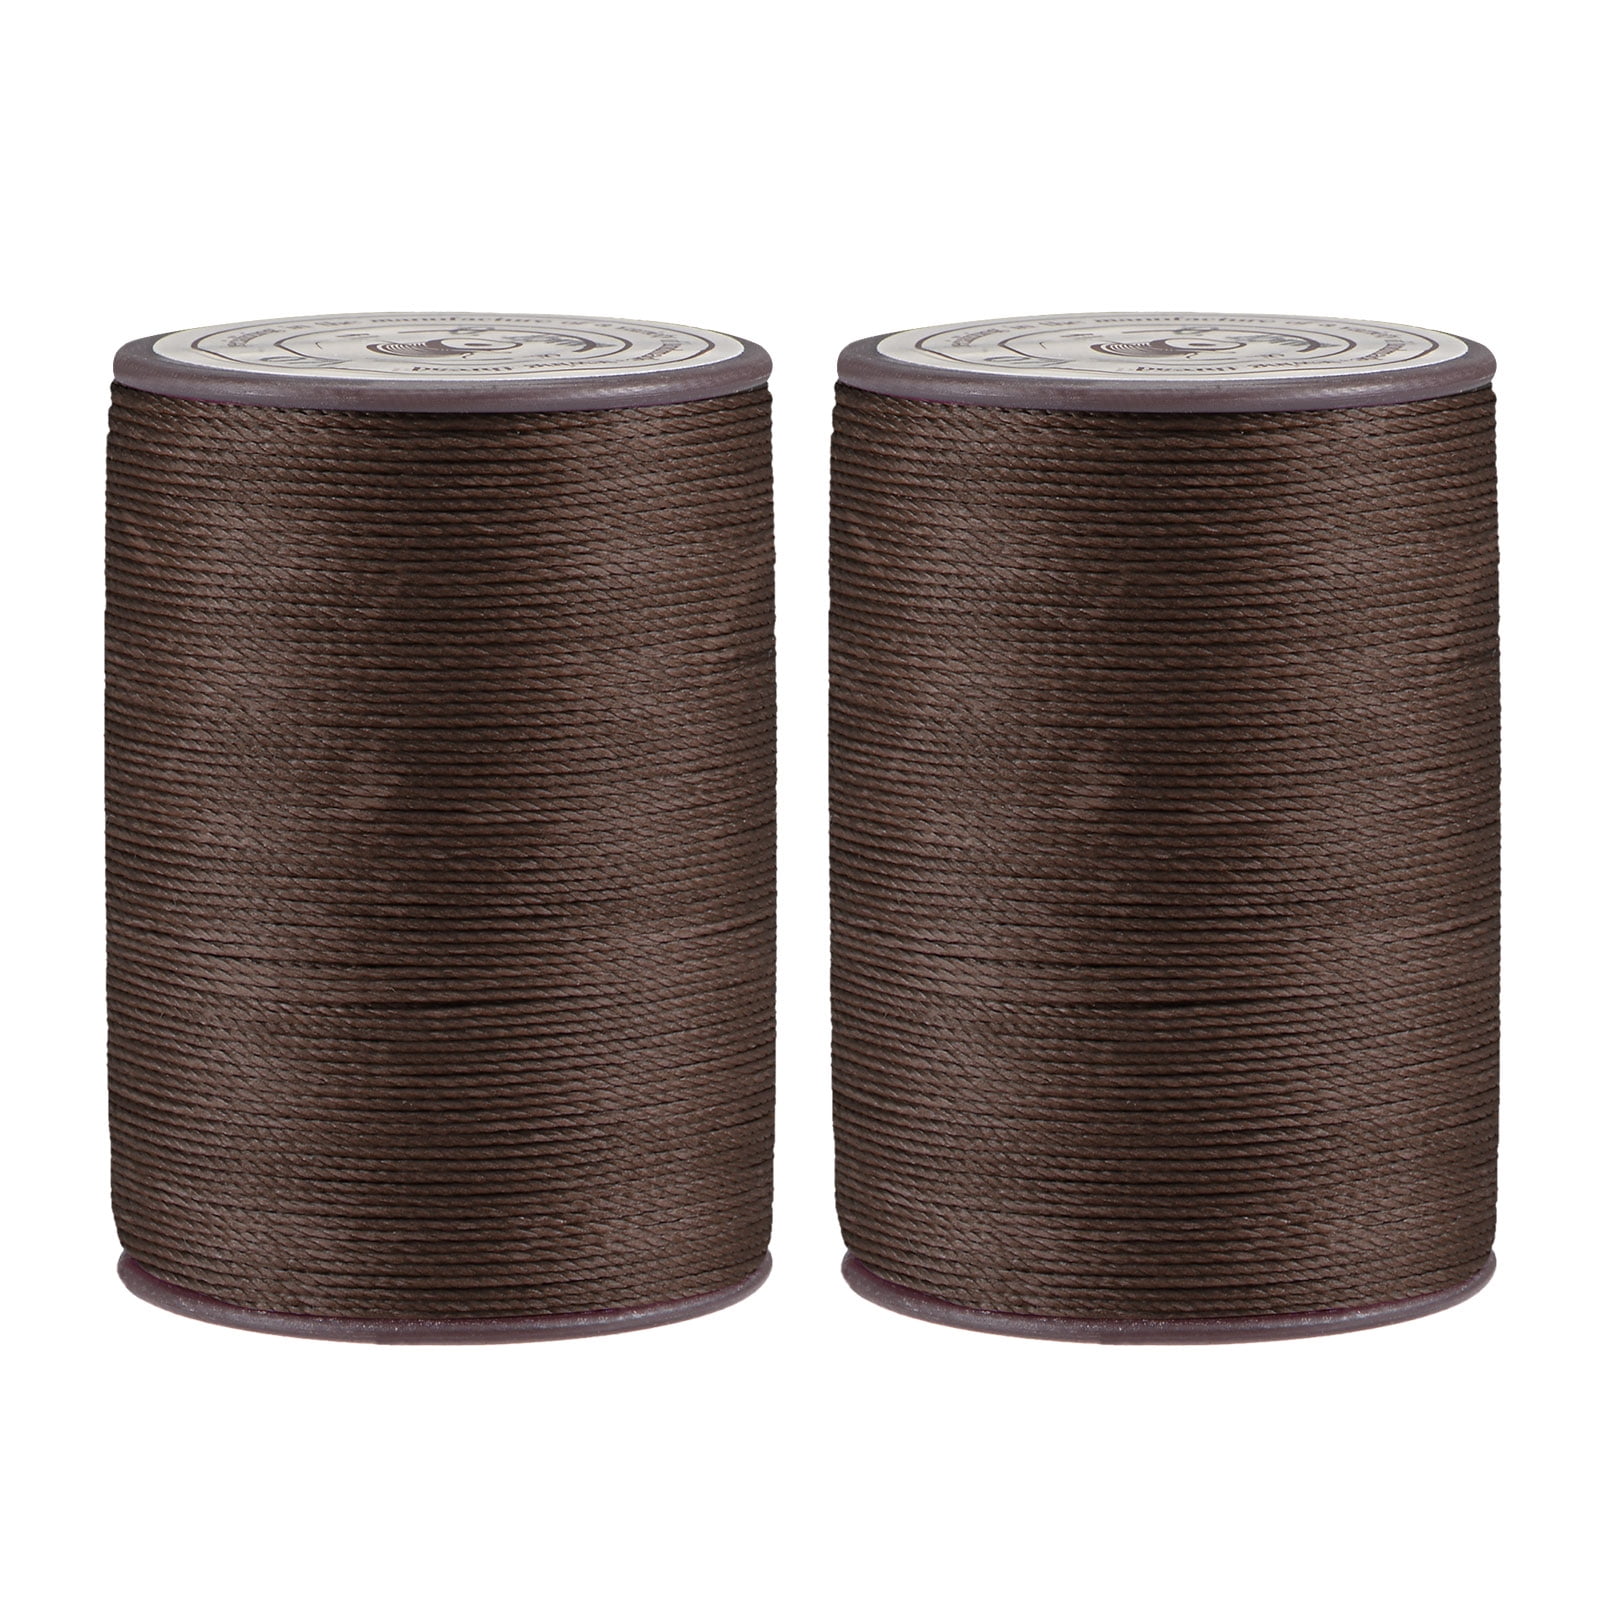 2 Pack Thin Waxed Thread 137 Yards 0.55mm Polyester String Cord